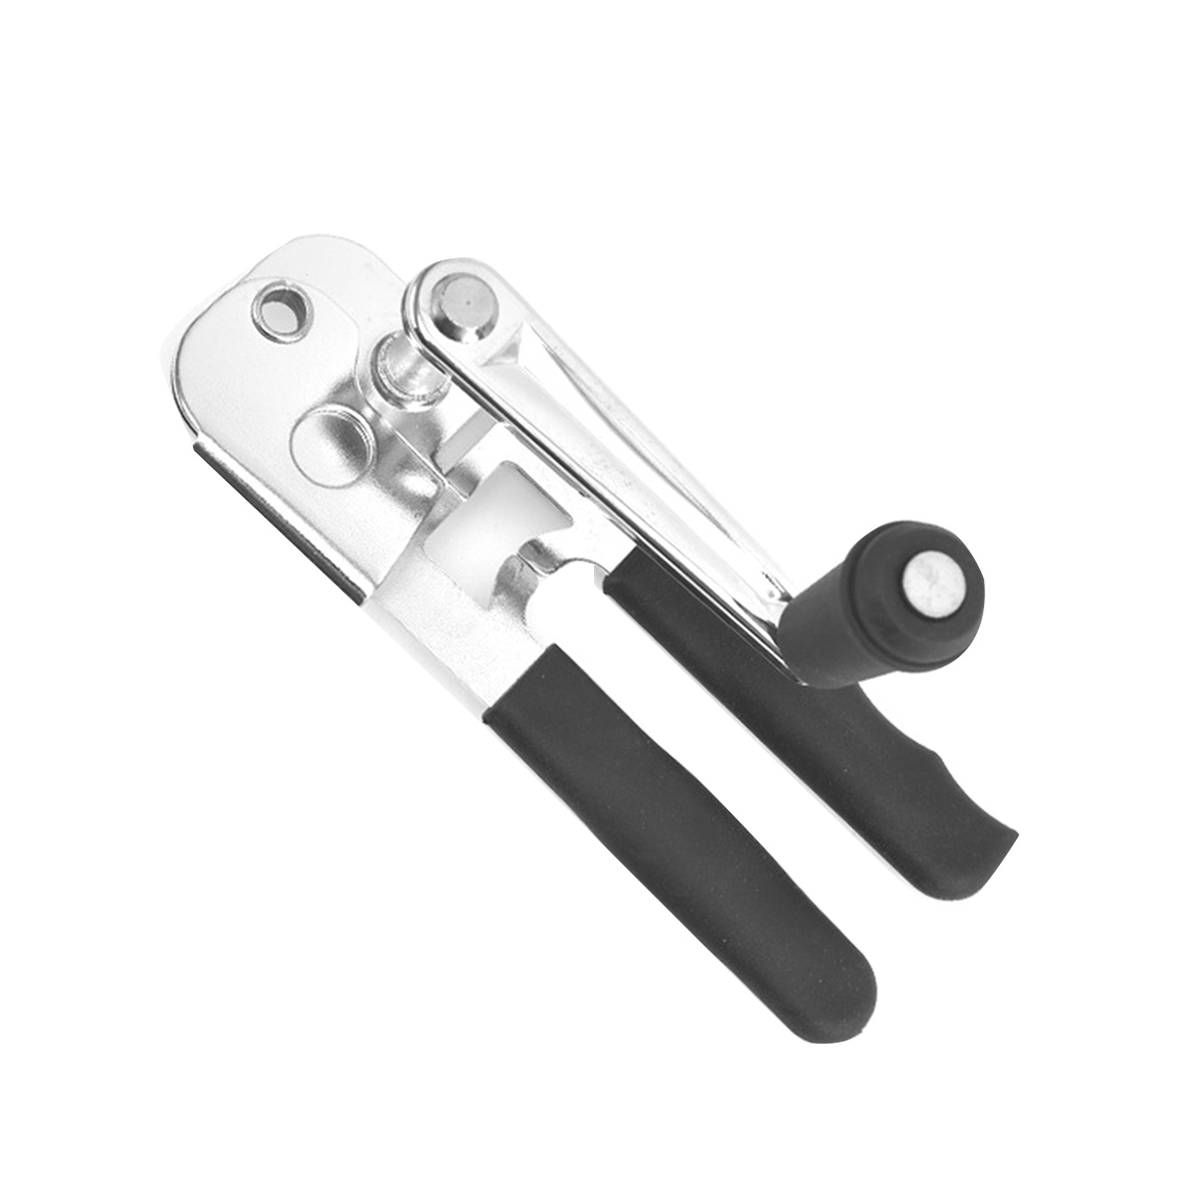 1 Piece Professional Can Manual Can Opener Craft Beer Grip Can Opener